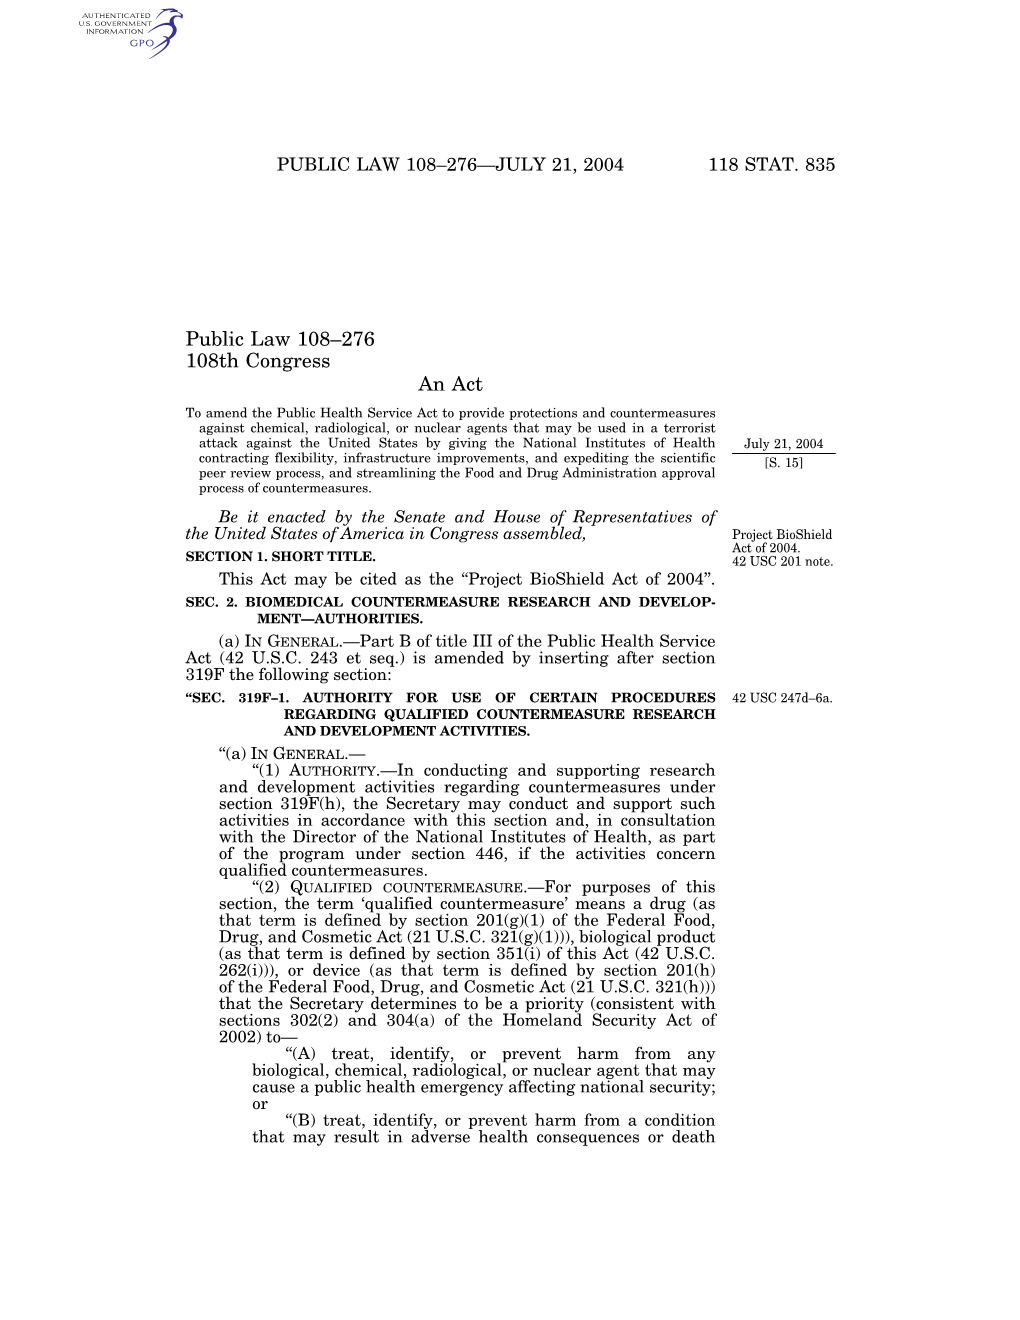 Project Bioshield Act of 2004